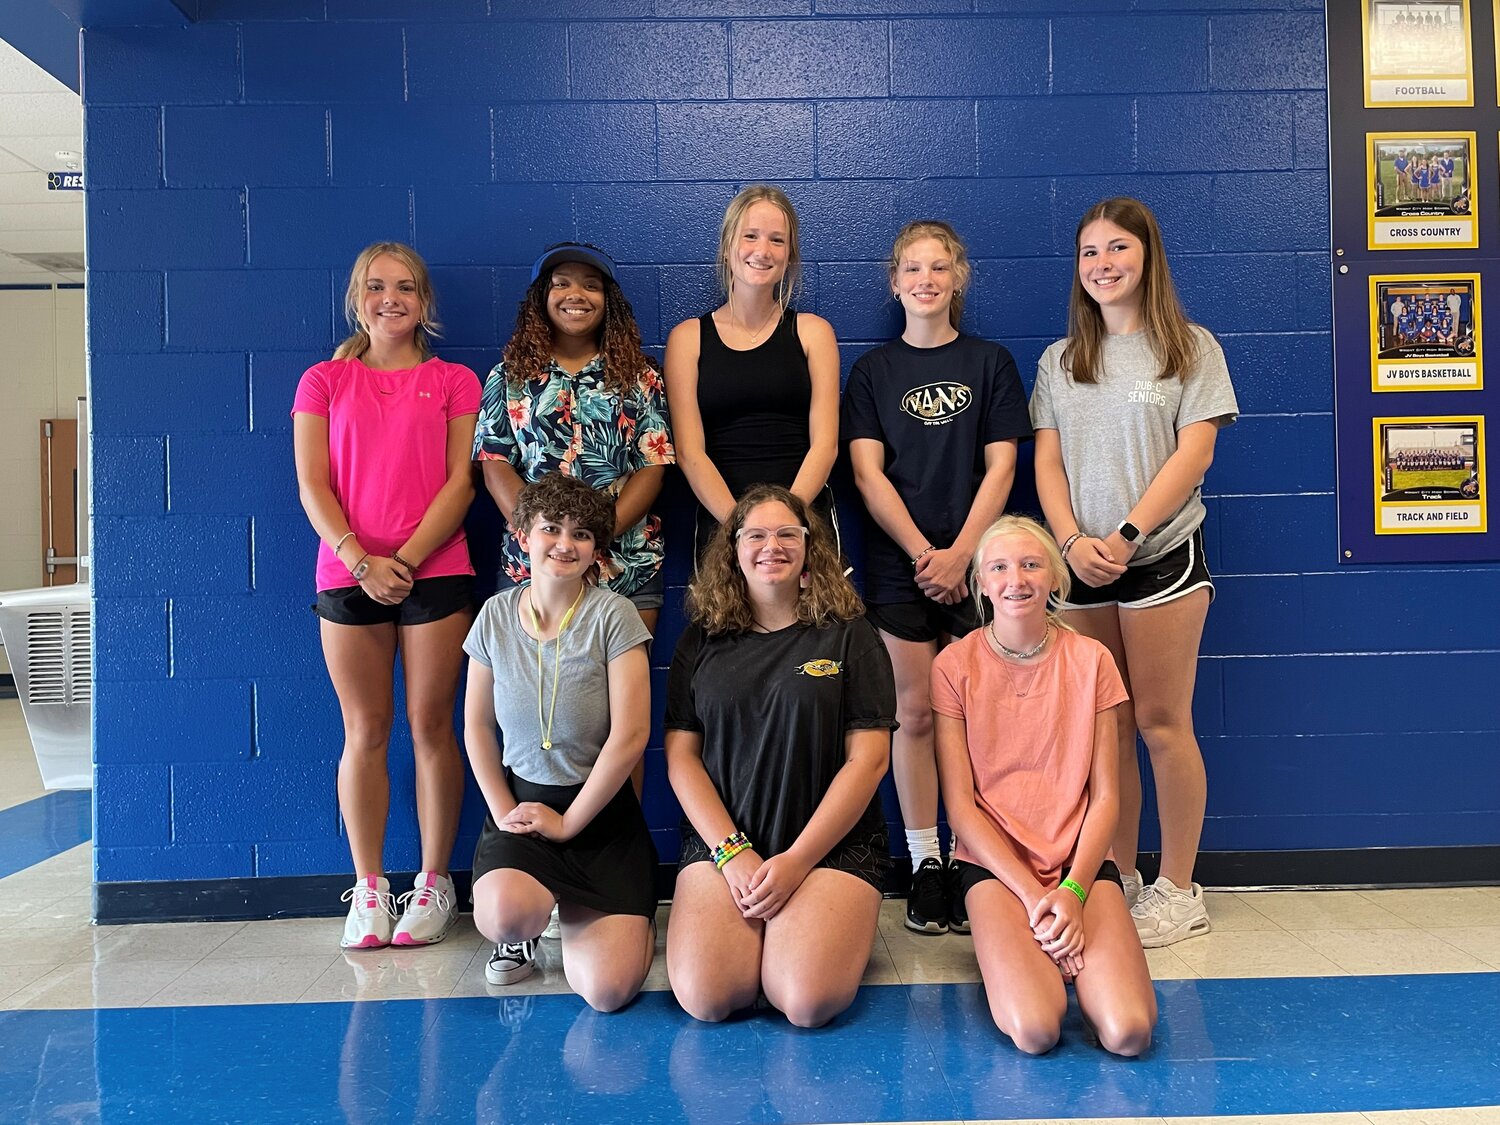 Members of the Wright City Golf team are front row, from left: Bailey Padgett, Skylla Barfield, Alexis Slayden. Back row, from left: Morgan Nute, Kailin Hawn, Kaedyn Johnson, Aubrey Lorraine, Abby Schanuel. Not pictured: Rylee Schaefer.